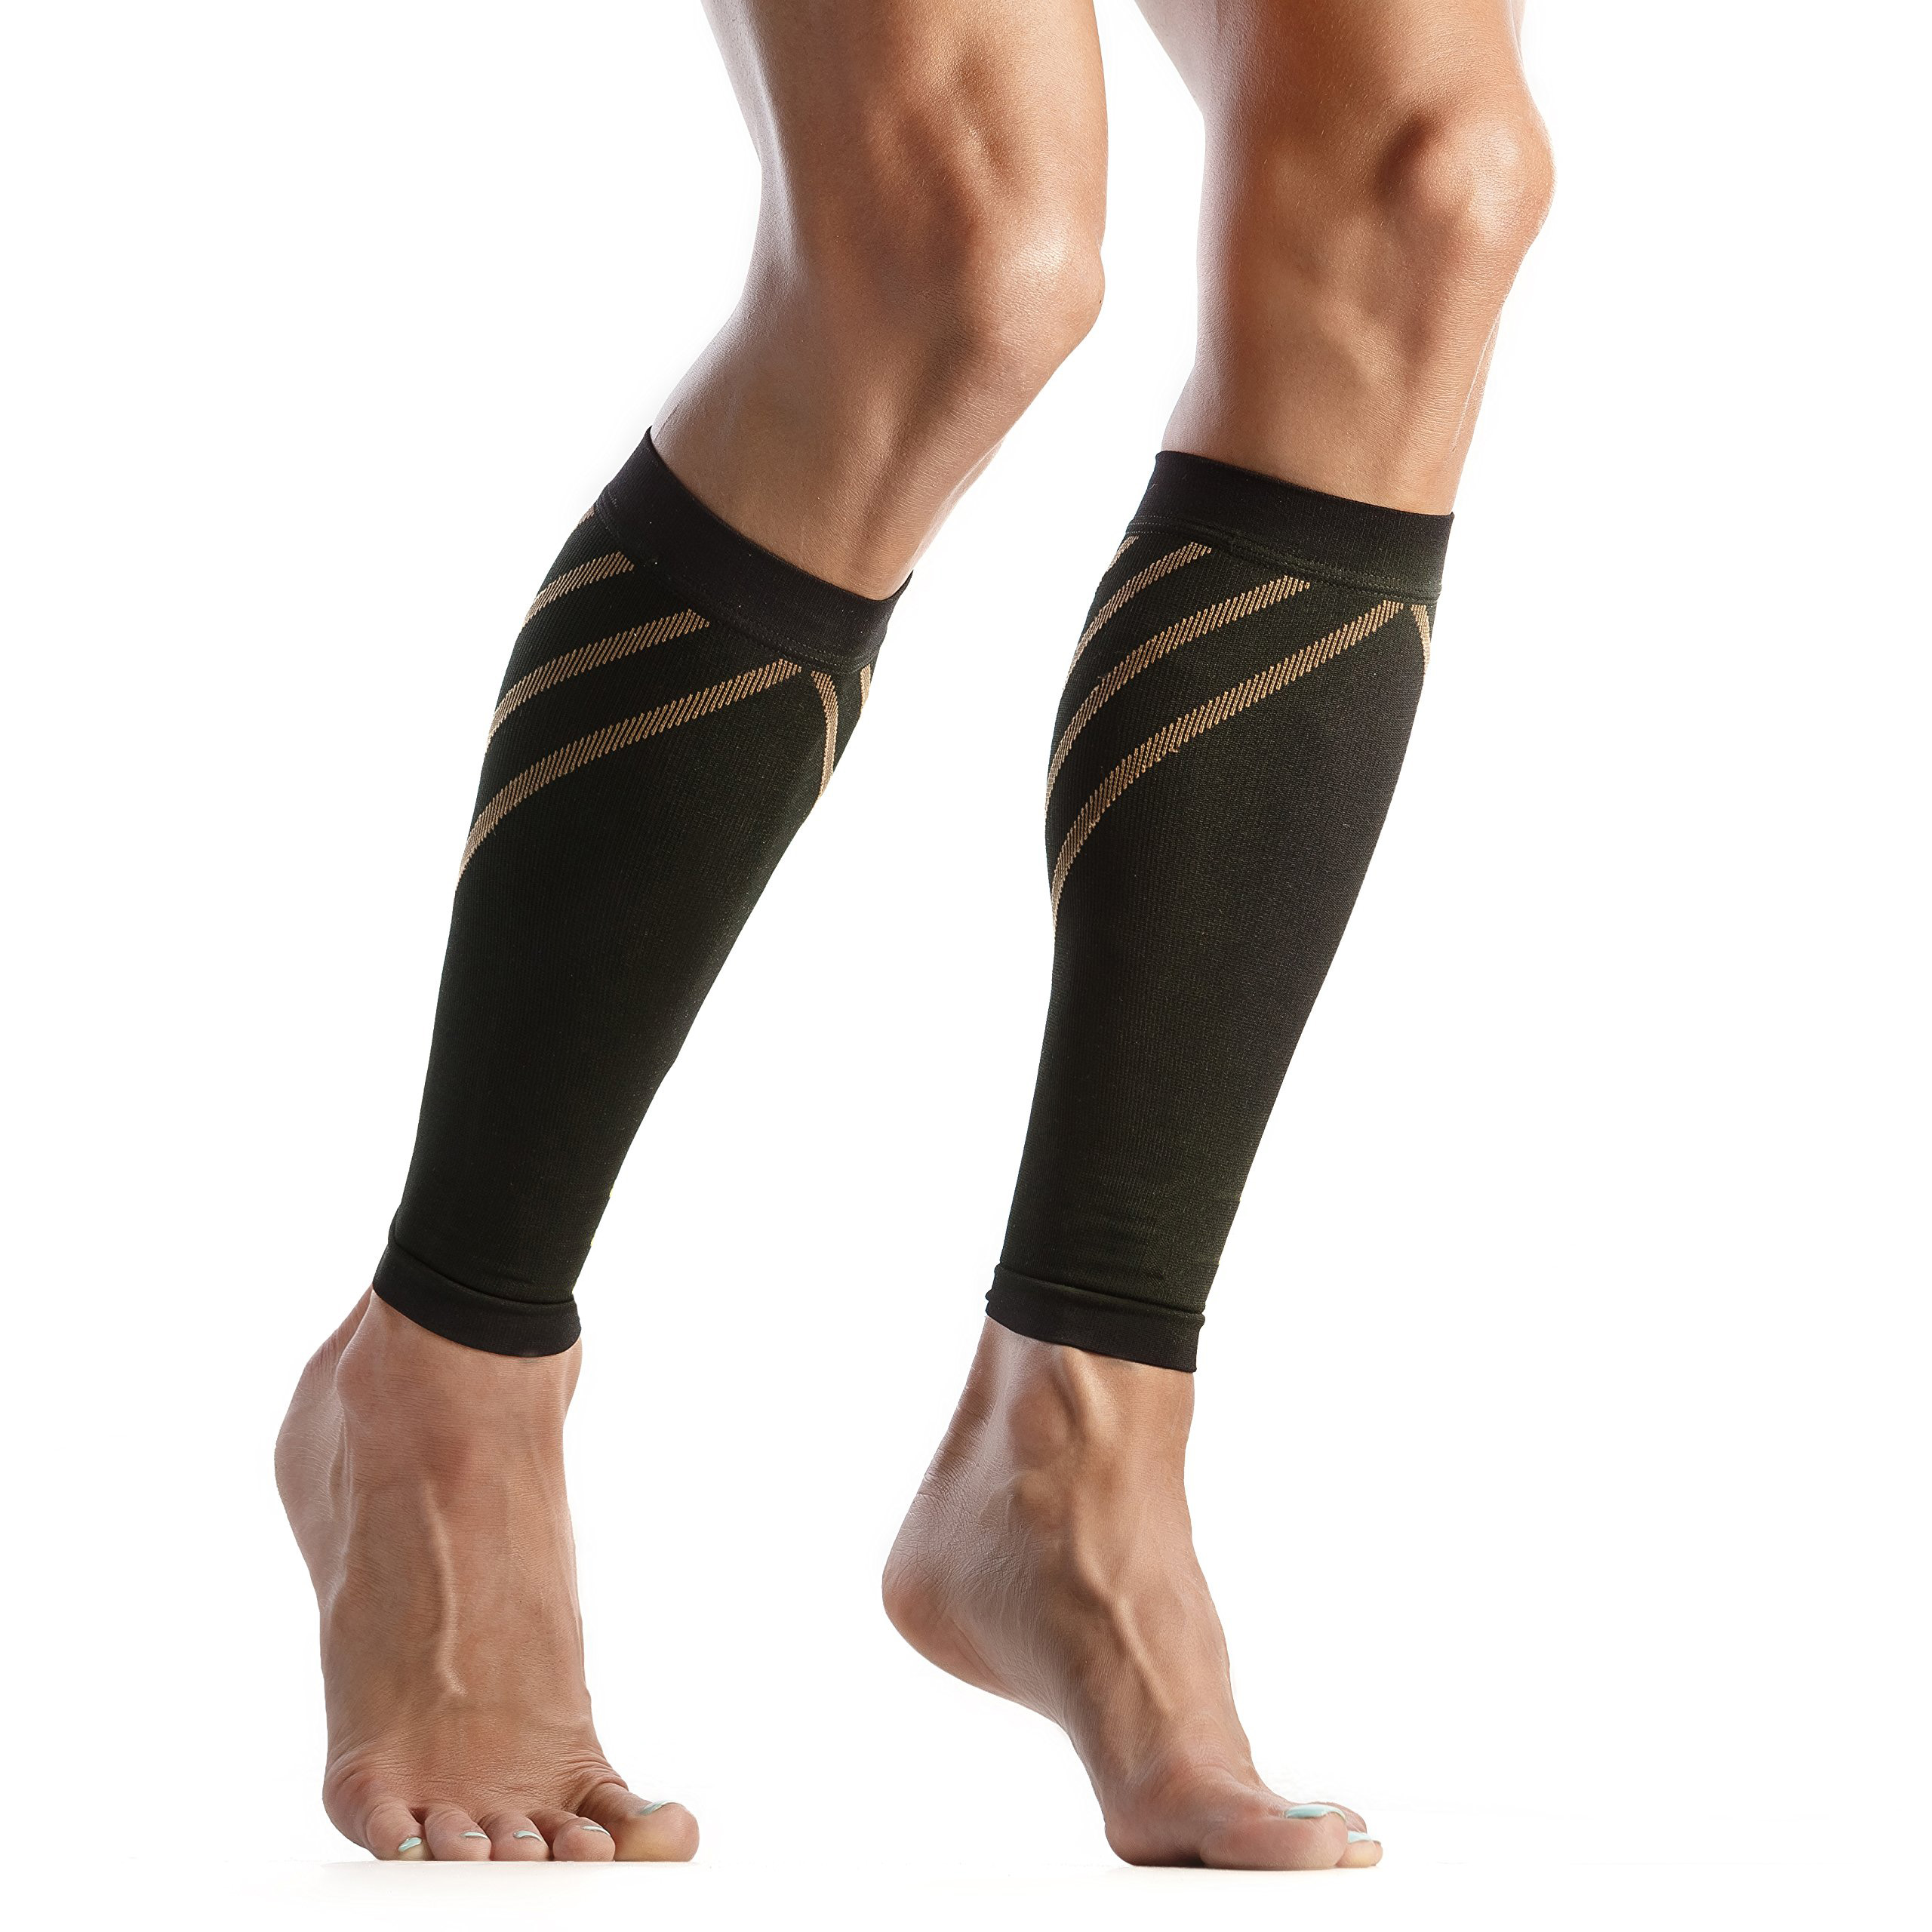 Compression Calf Sleeve – Copper-Infused High-Performance Design, Promotes Proper Blood Flow, Offers Superior Compression and Support for All Lifestyles – Pair Featured Image